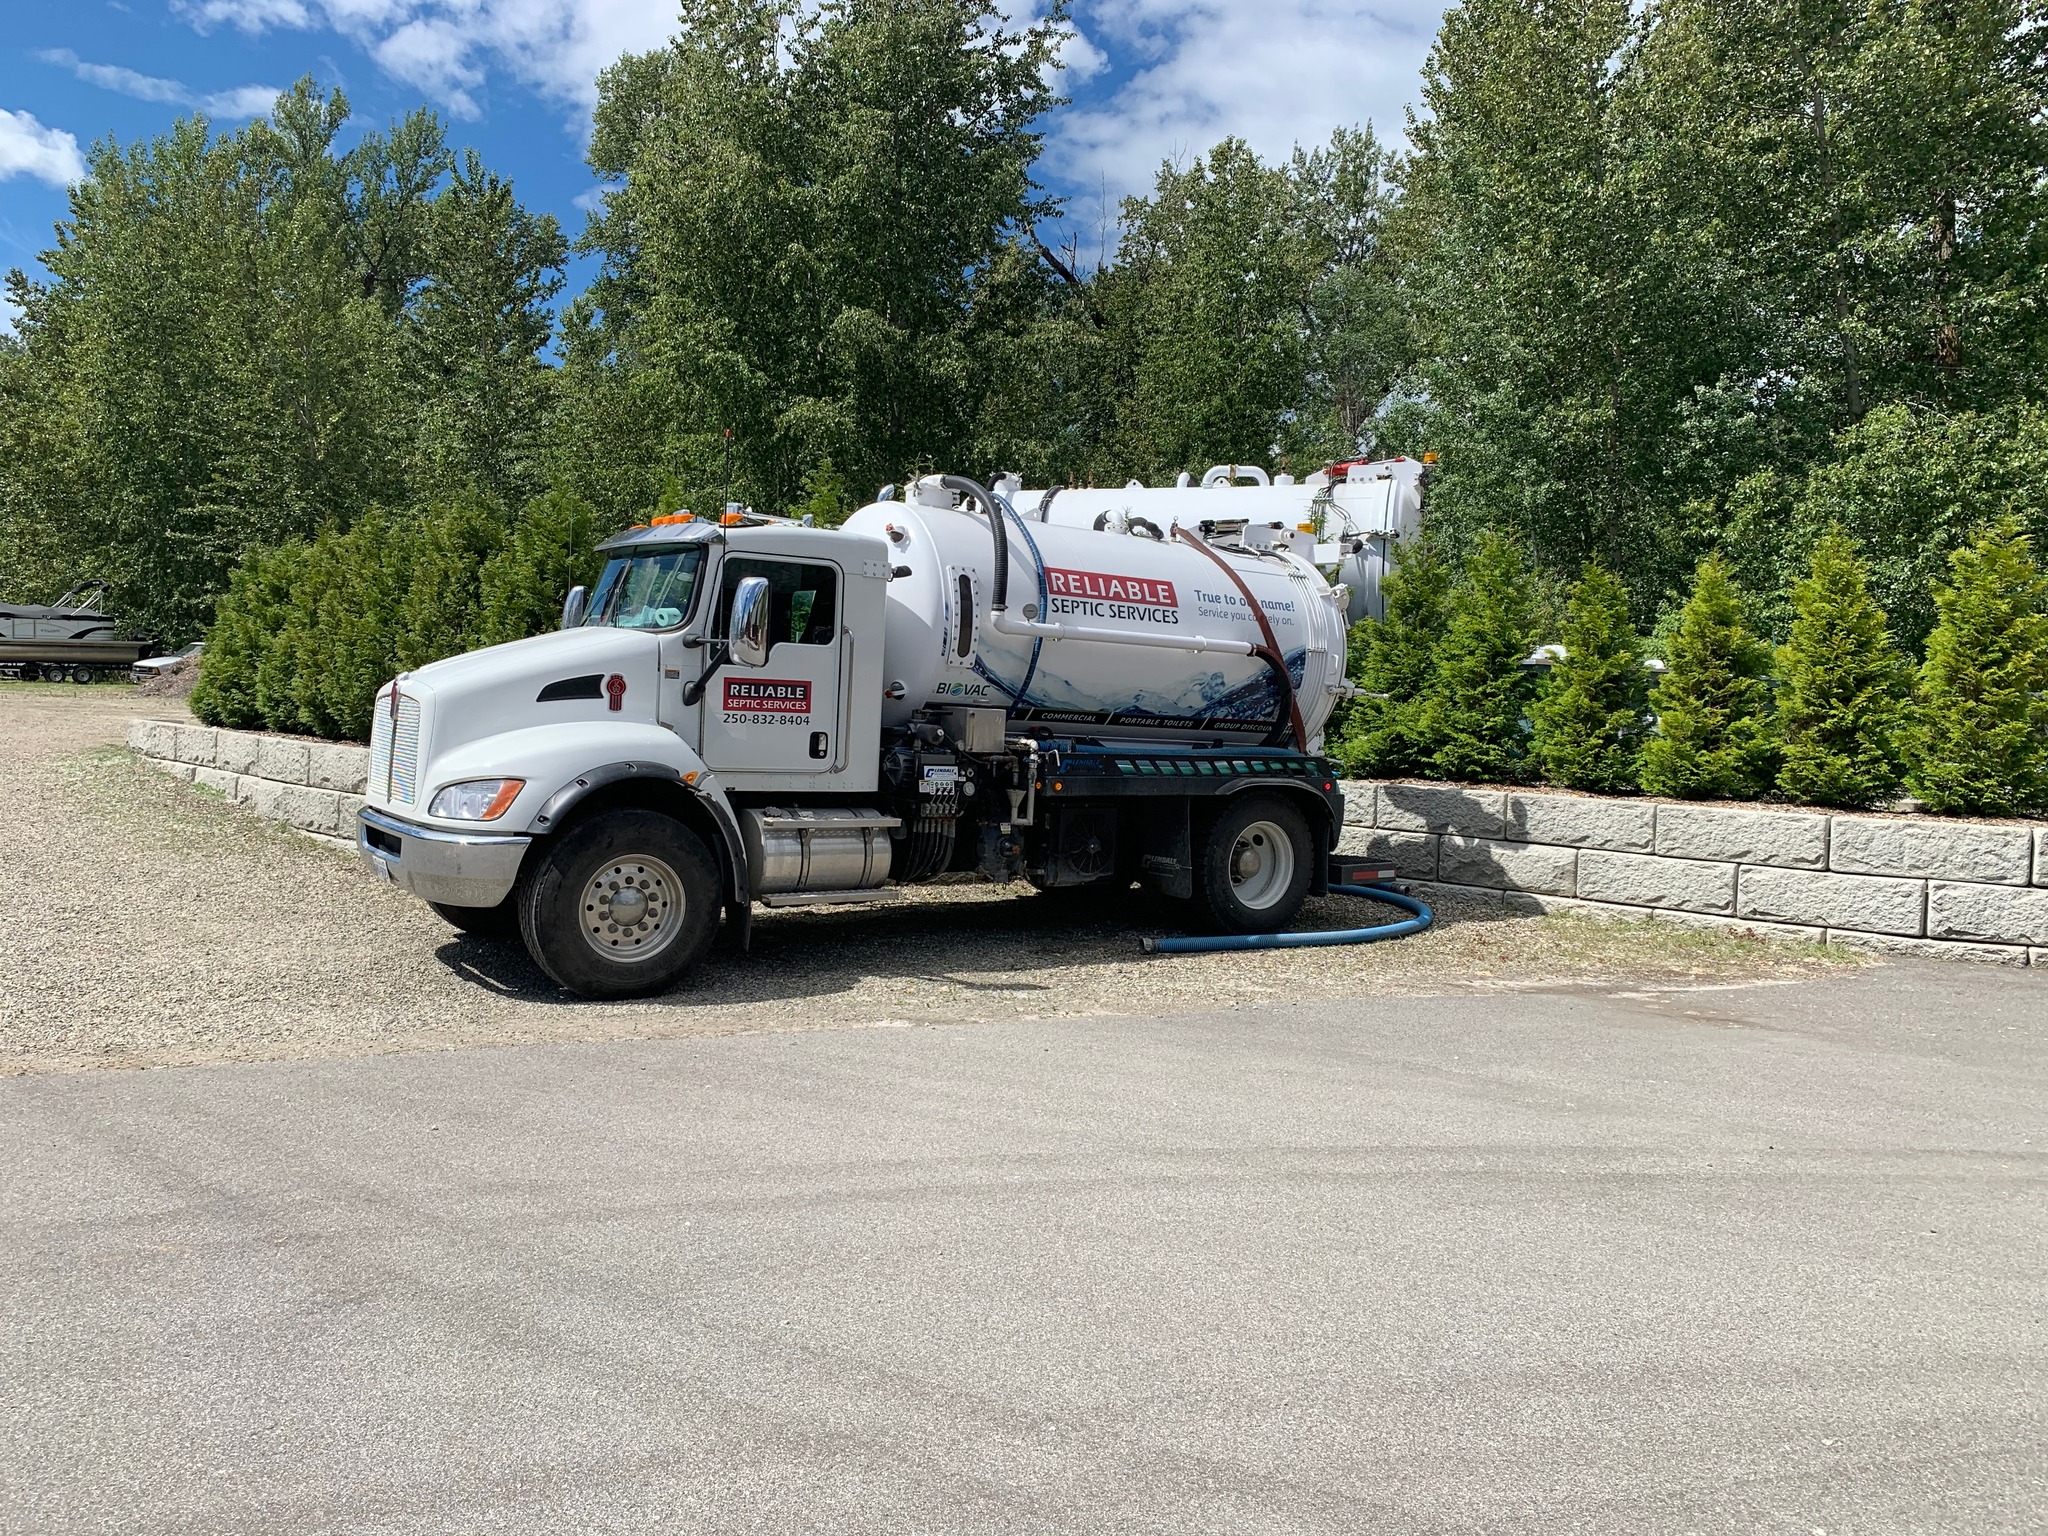 Reliable Septic Services: Reliable Septic Services Inc. provides the Shuswap and surrounding areas with professional septic services. Locally owned for over 30 years, Reliable Septic has the experience to handle all your residential and […]